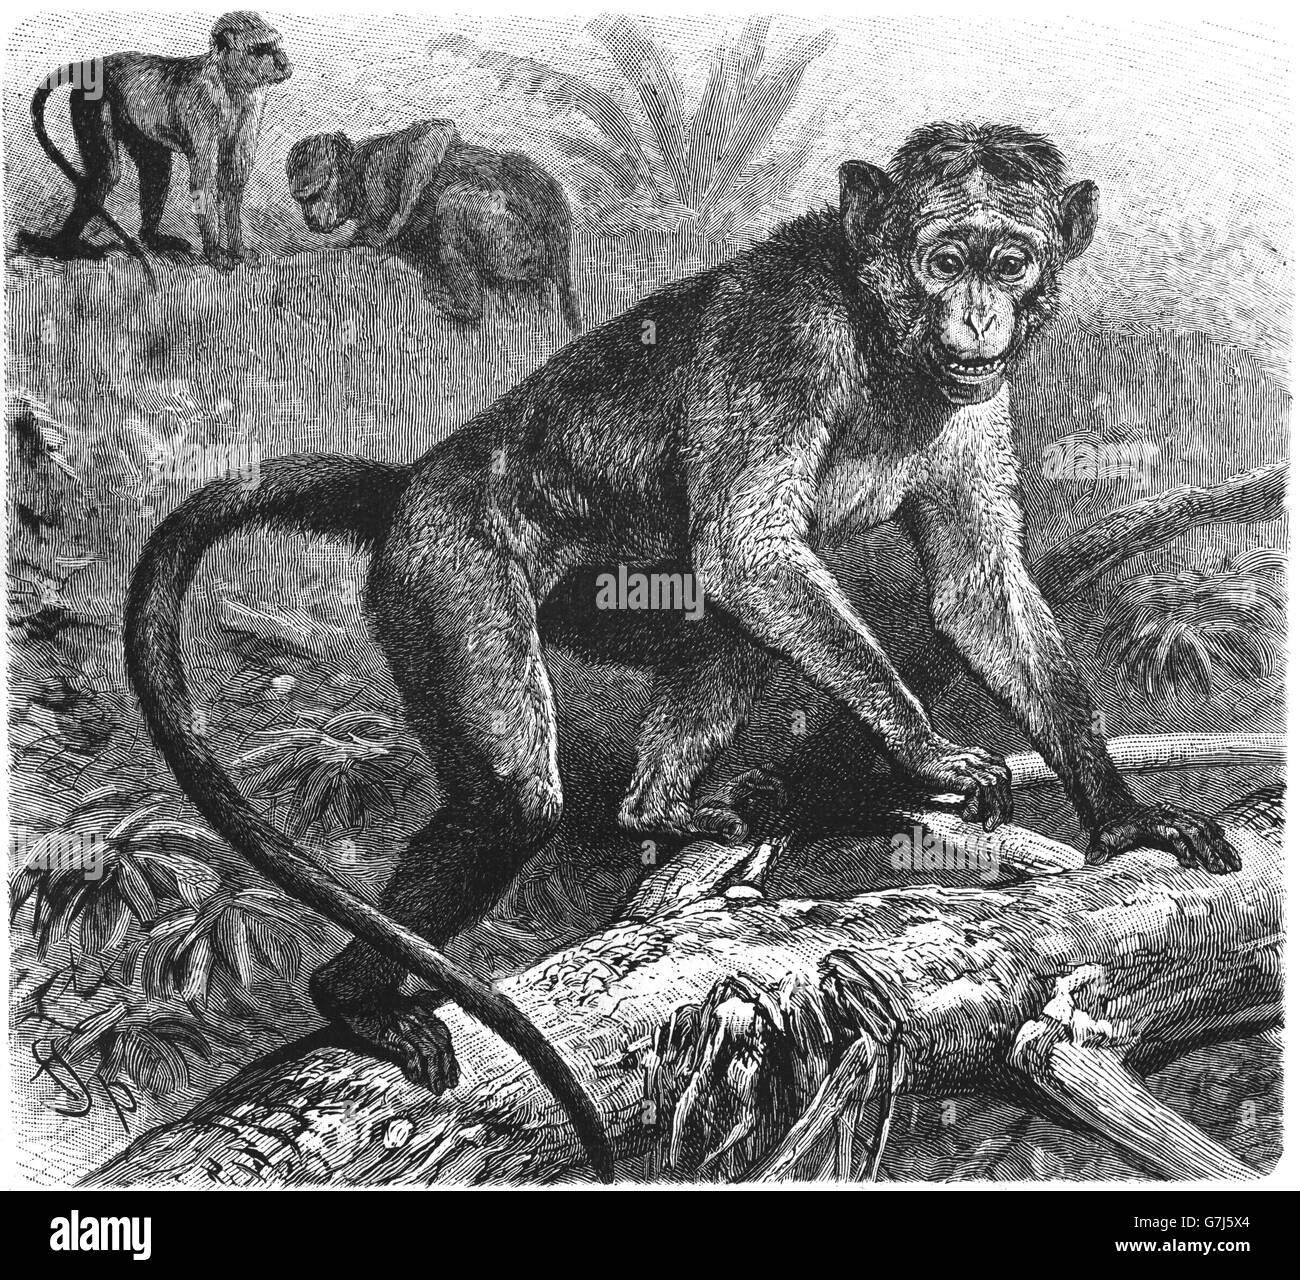 Toque macaque, Macaca sinica, Old World monkey, Cercopithecidae, illustration from book dated 1904 Stock Photo